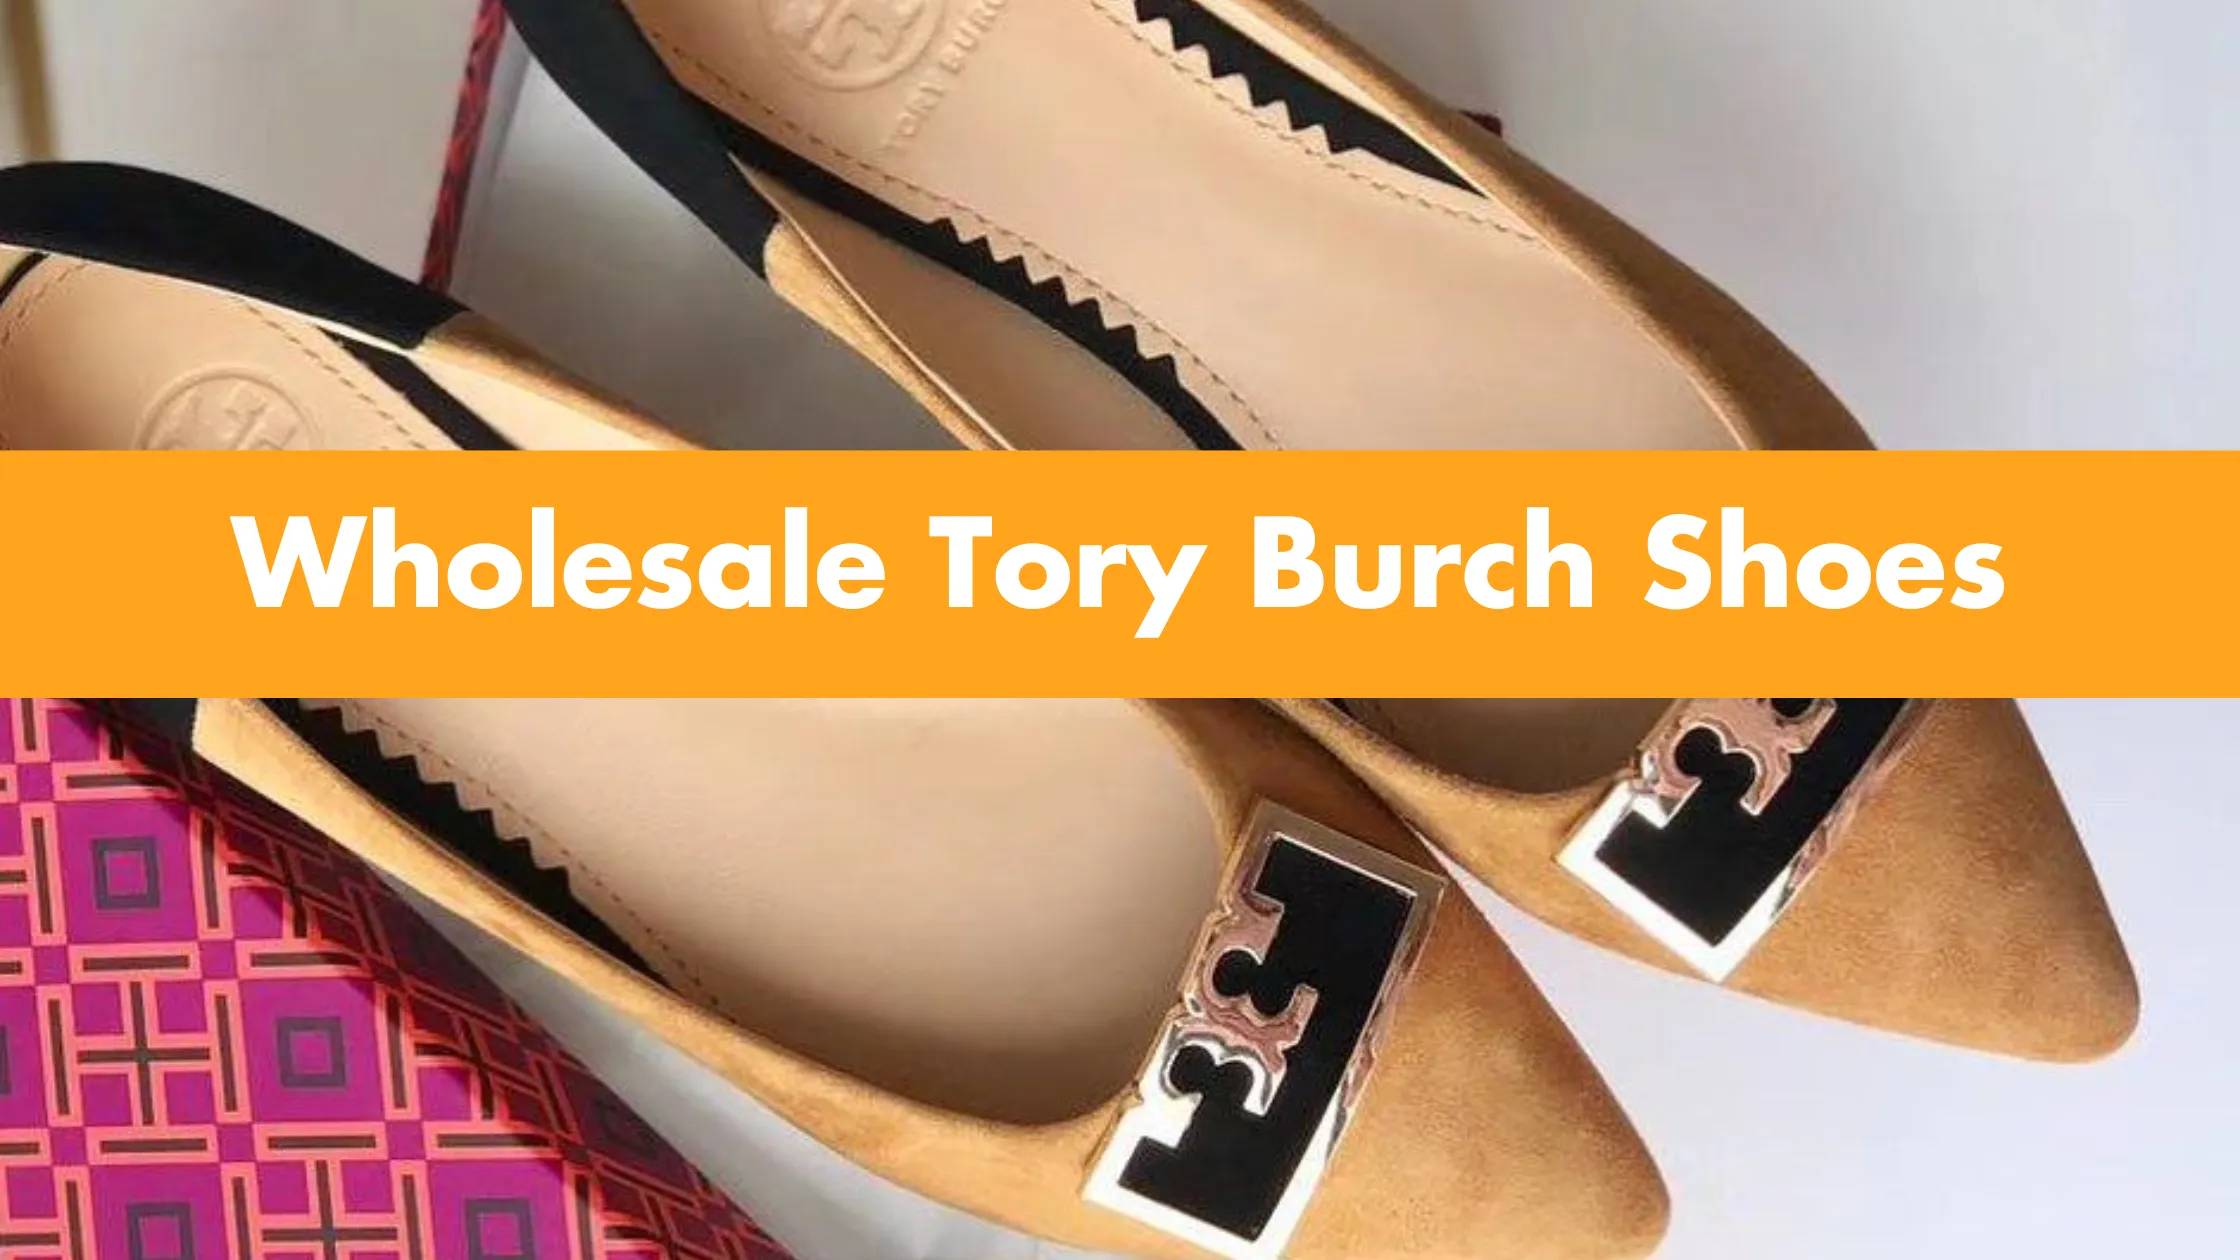 Wholesale Tory Burch Shoes Review